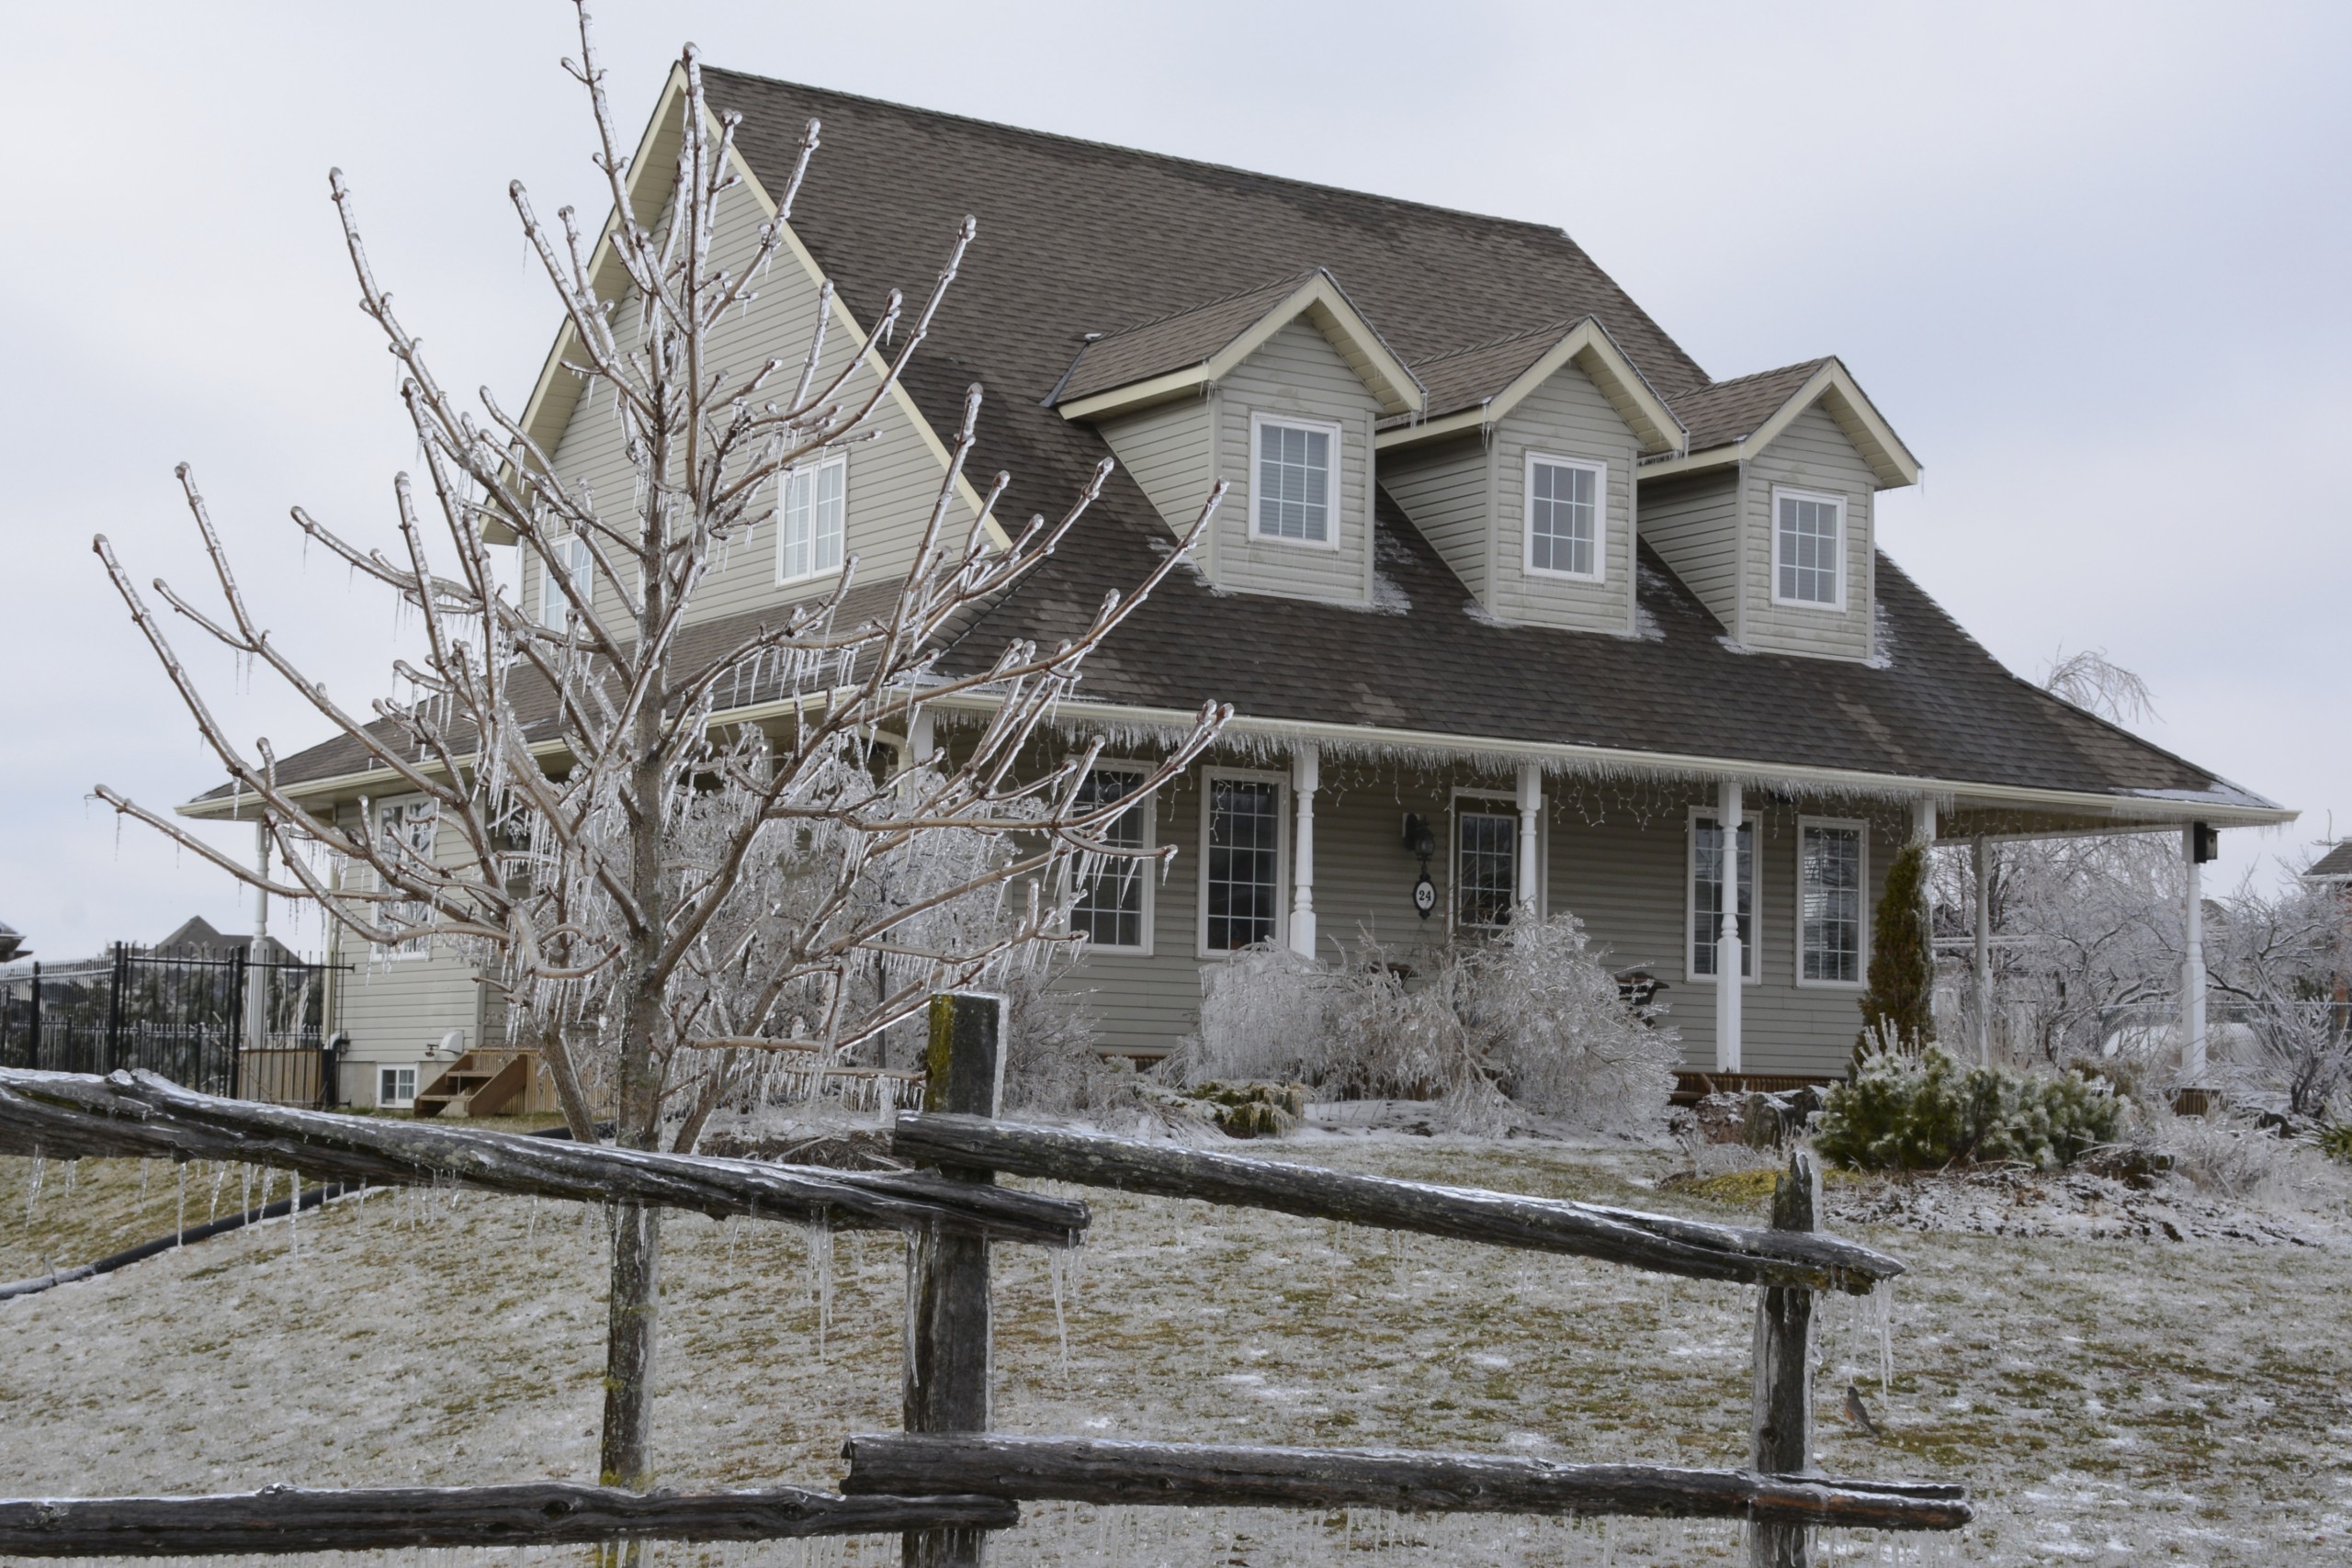 residential property covered in icicles after an ice storm